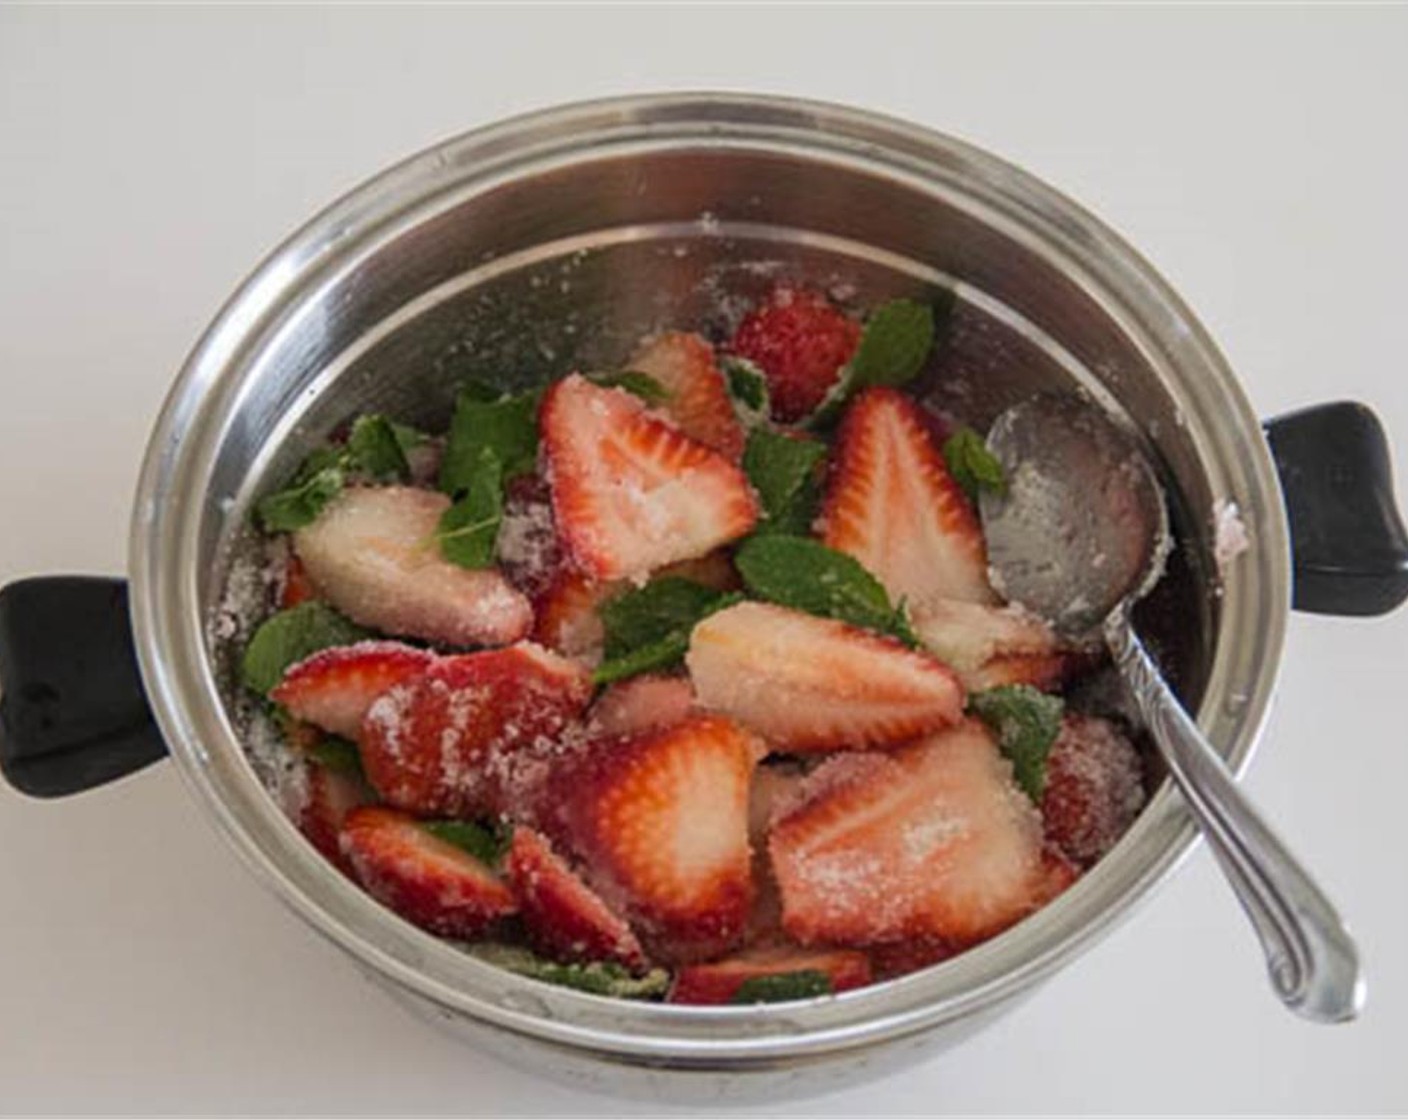 step 1 In a medium bowl, mash Fresh Strawberries (3 cups), Fresh Mint (8 sprigs), and Granulated Sugar (1/2 cup) with a muddler. A potato masher will work too. Set aside to macerate for 15-30 minutes.